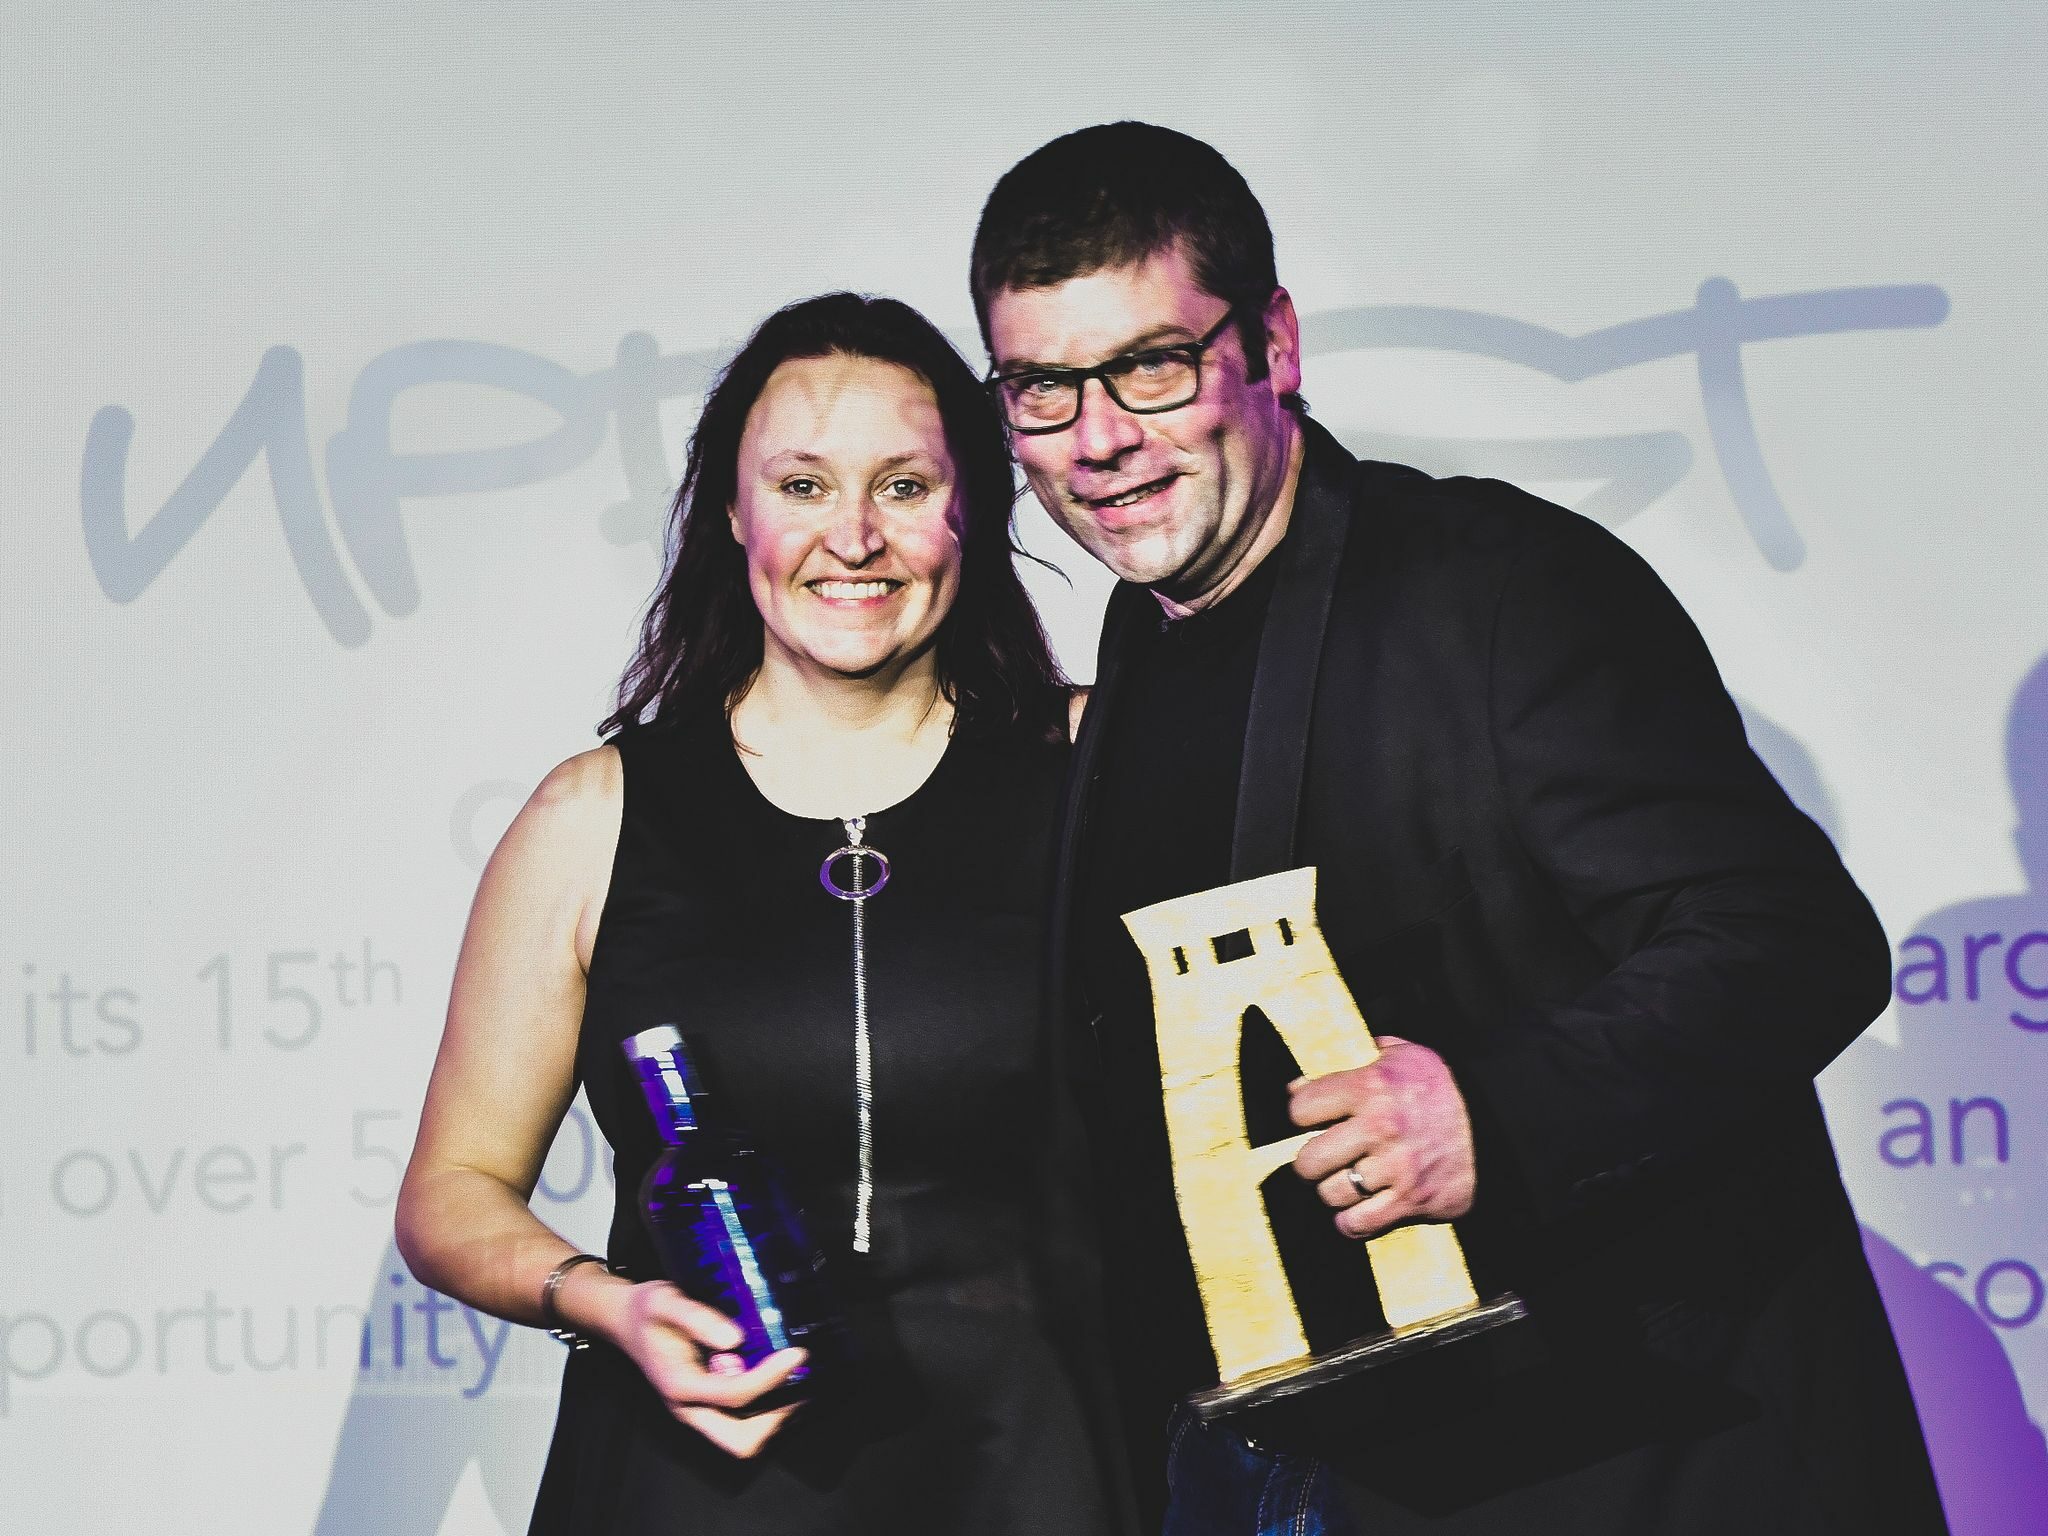 Stephen & Emma Hayles, Founders at Upfest. A couple proudly holding awards, both are wearing black outfits.